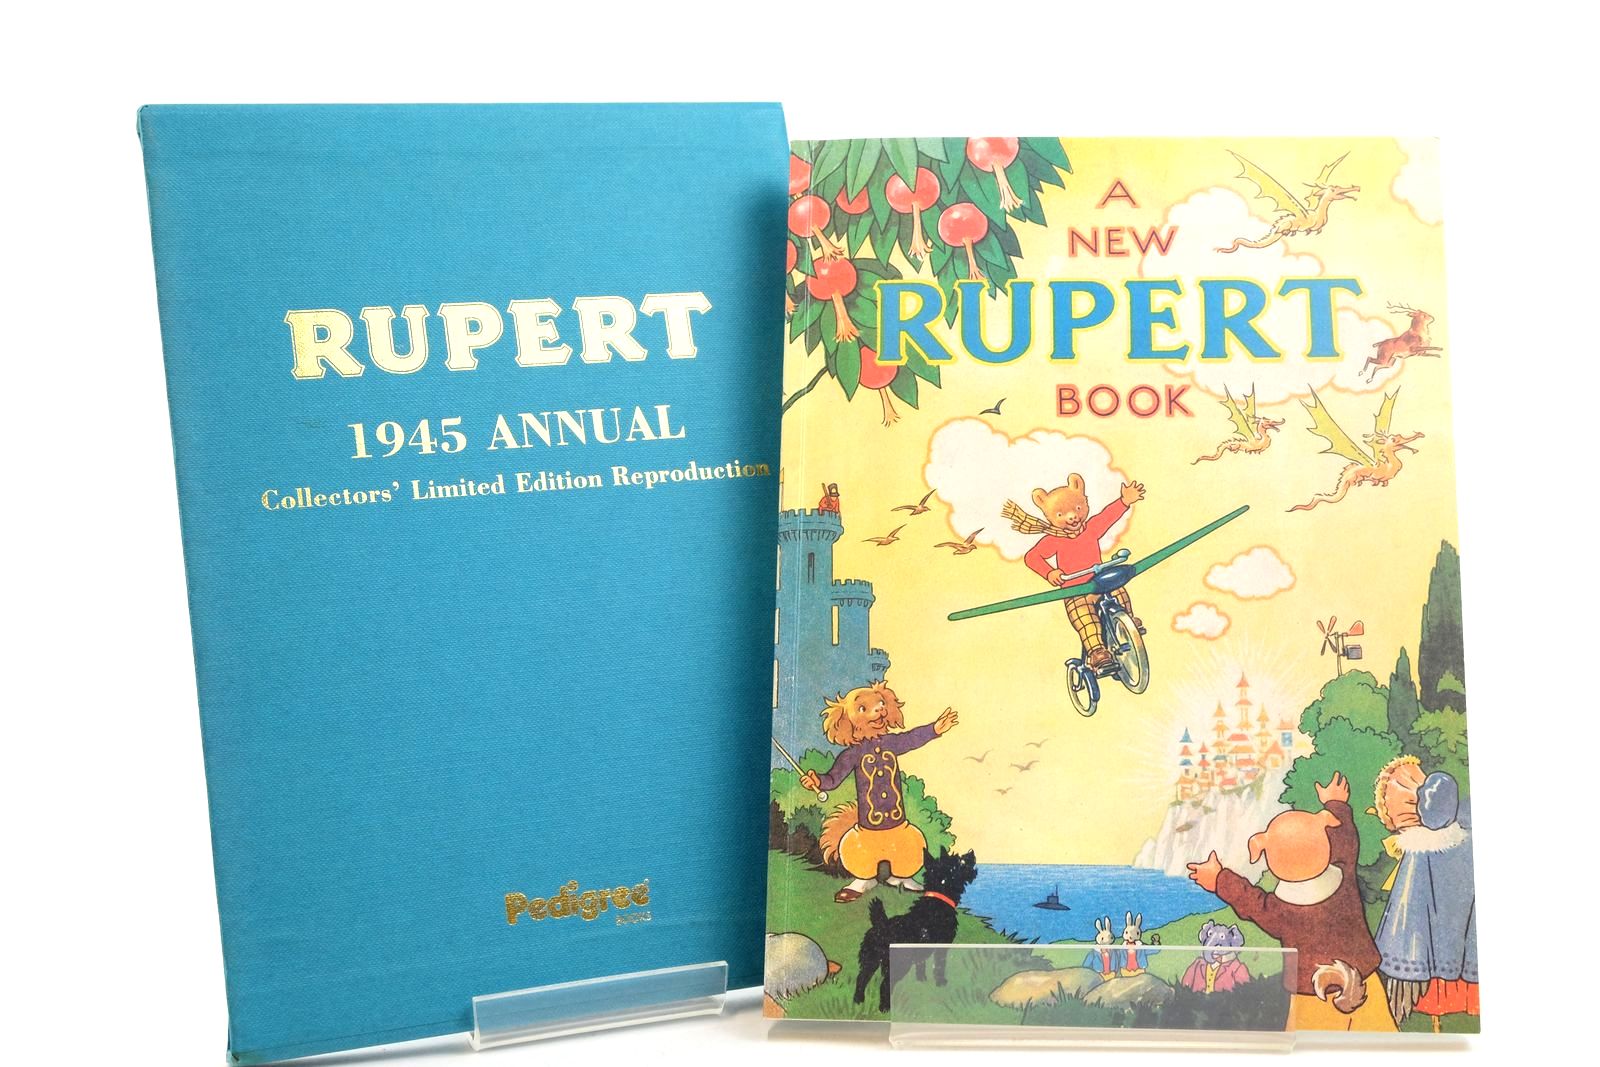 Photo of RUPERT ANNUAL 1945 (FACSIMILE) - A NEW RUPERT BOOK written by Bestall, Alfred illustrated by Bestall, Alfred published by Pedigree Books Limited (STOCK CODE: 2139423)  for sale by Stella & Rose's Books